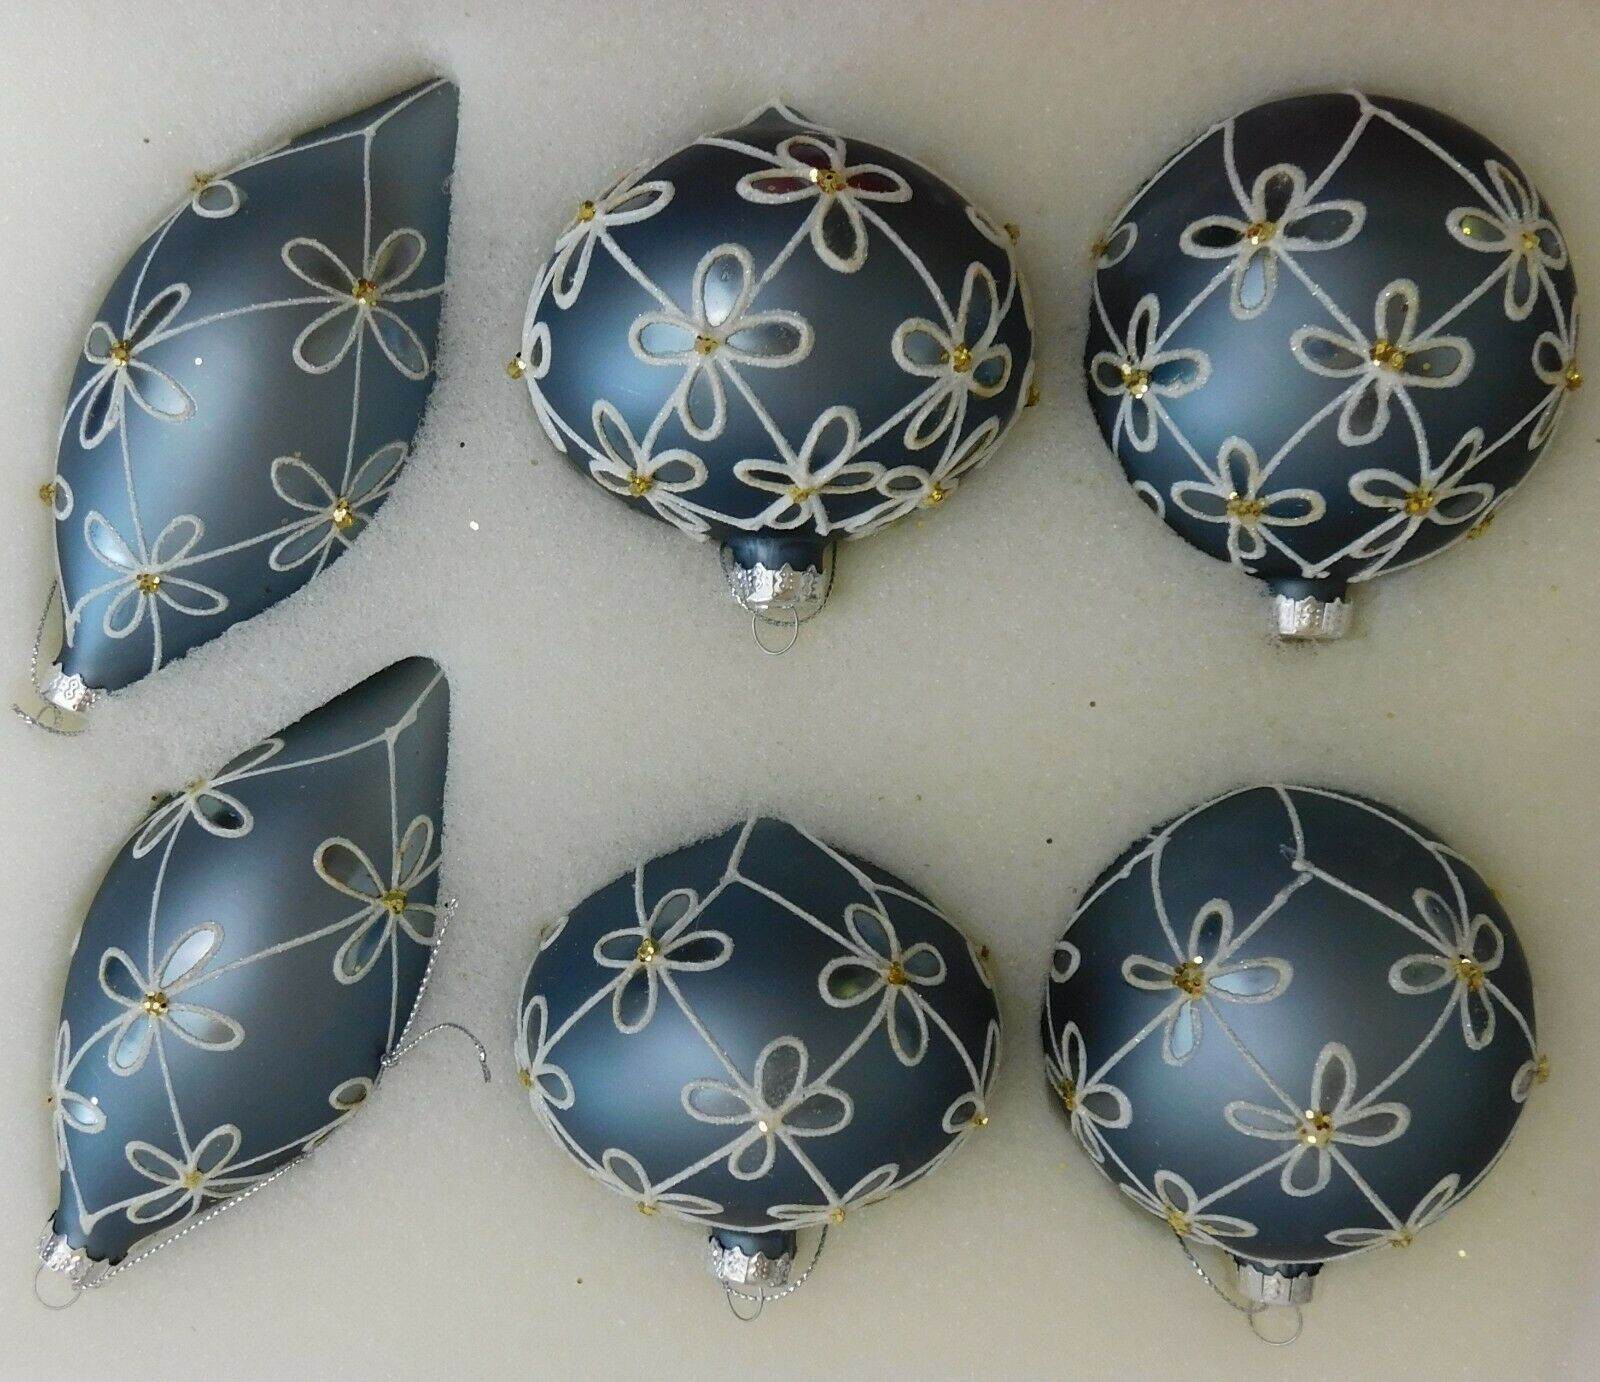 Lenox Grey Floral  6 Piece Ornament Ball Set New in Box American by Design 